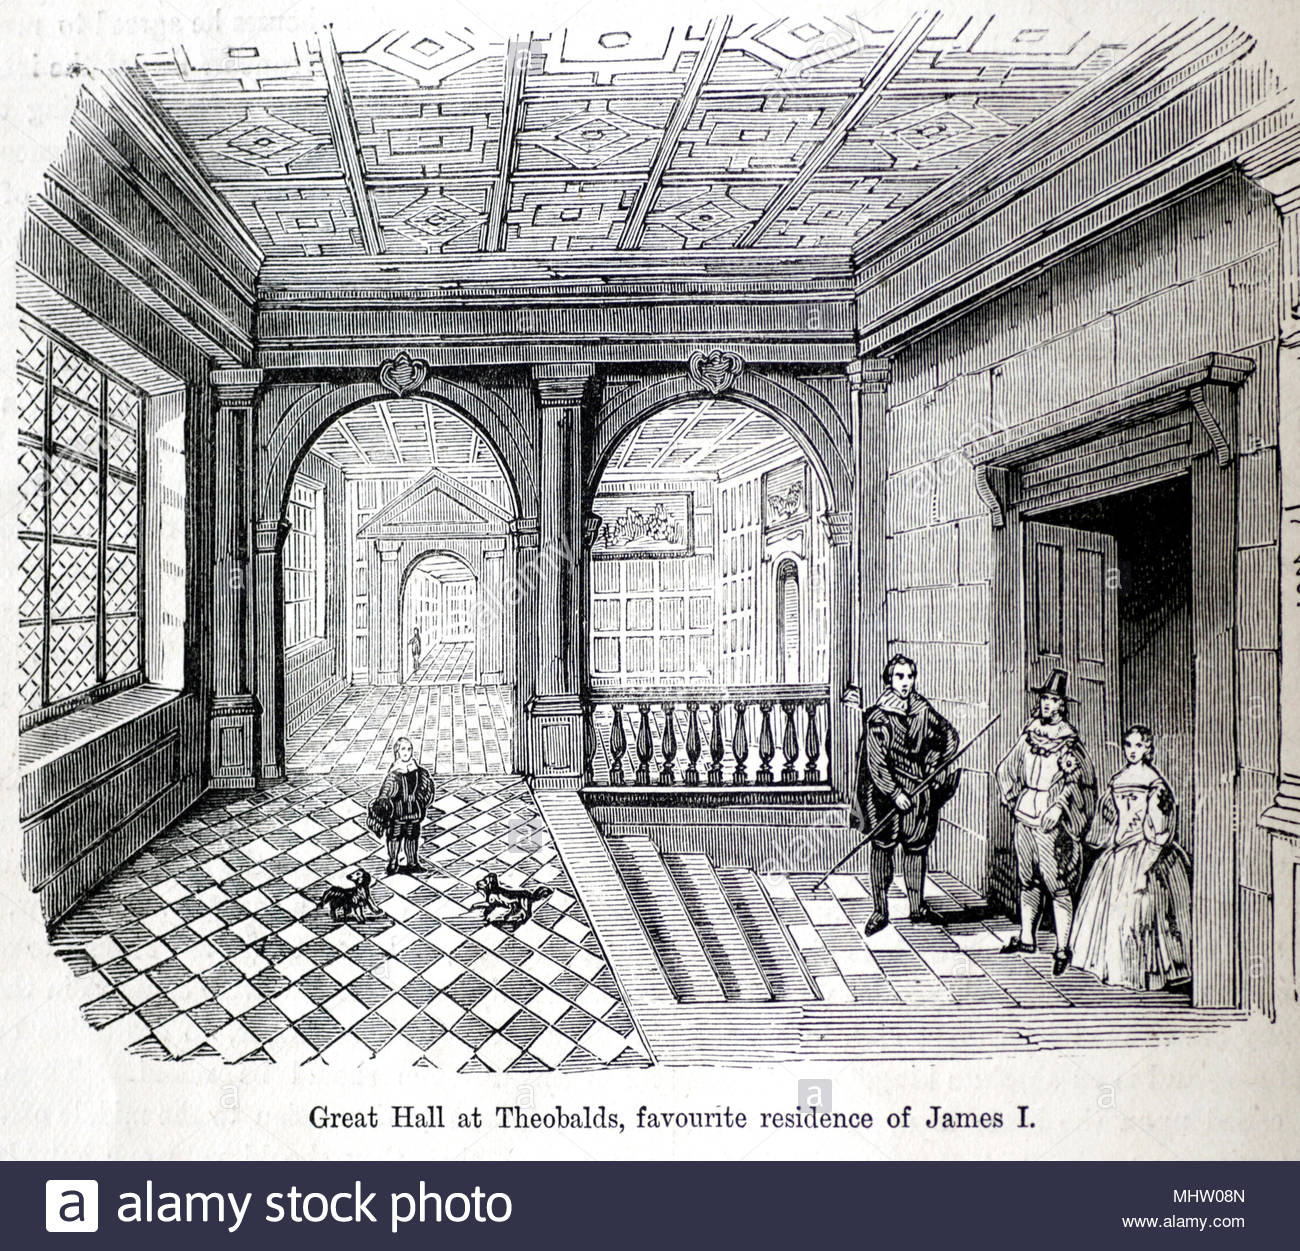 Great Hall at Theobalds, favourite residence of King James I, antique illustration from circa 1880 Stock Photo